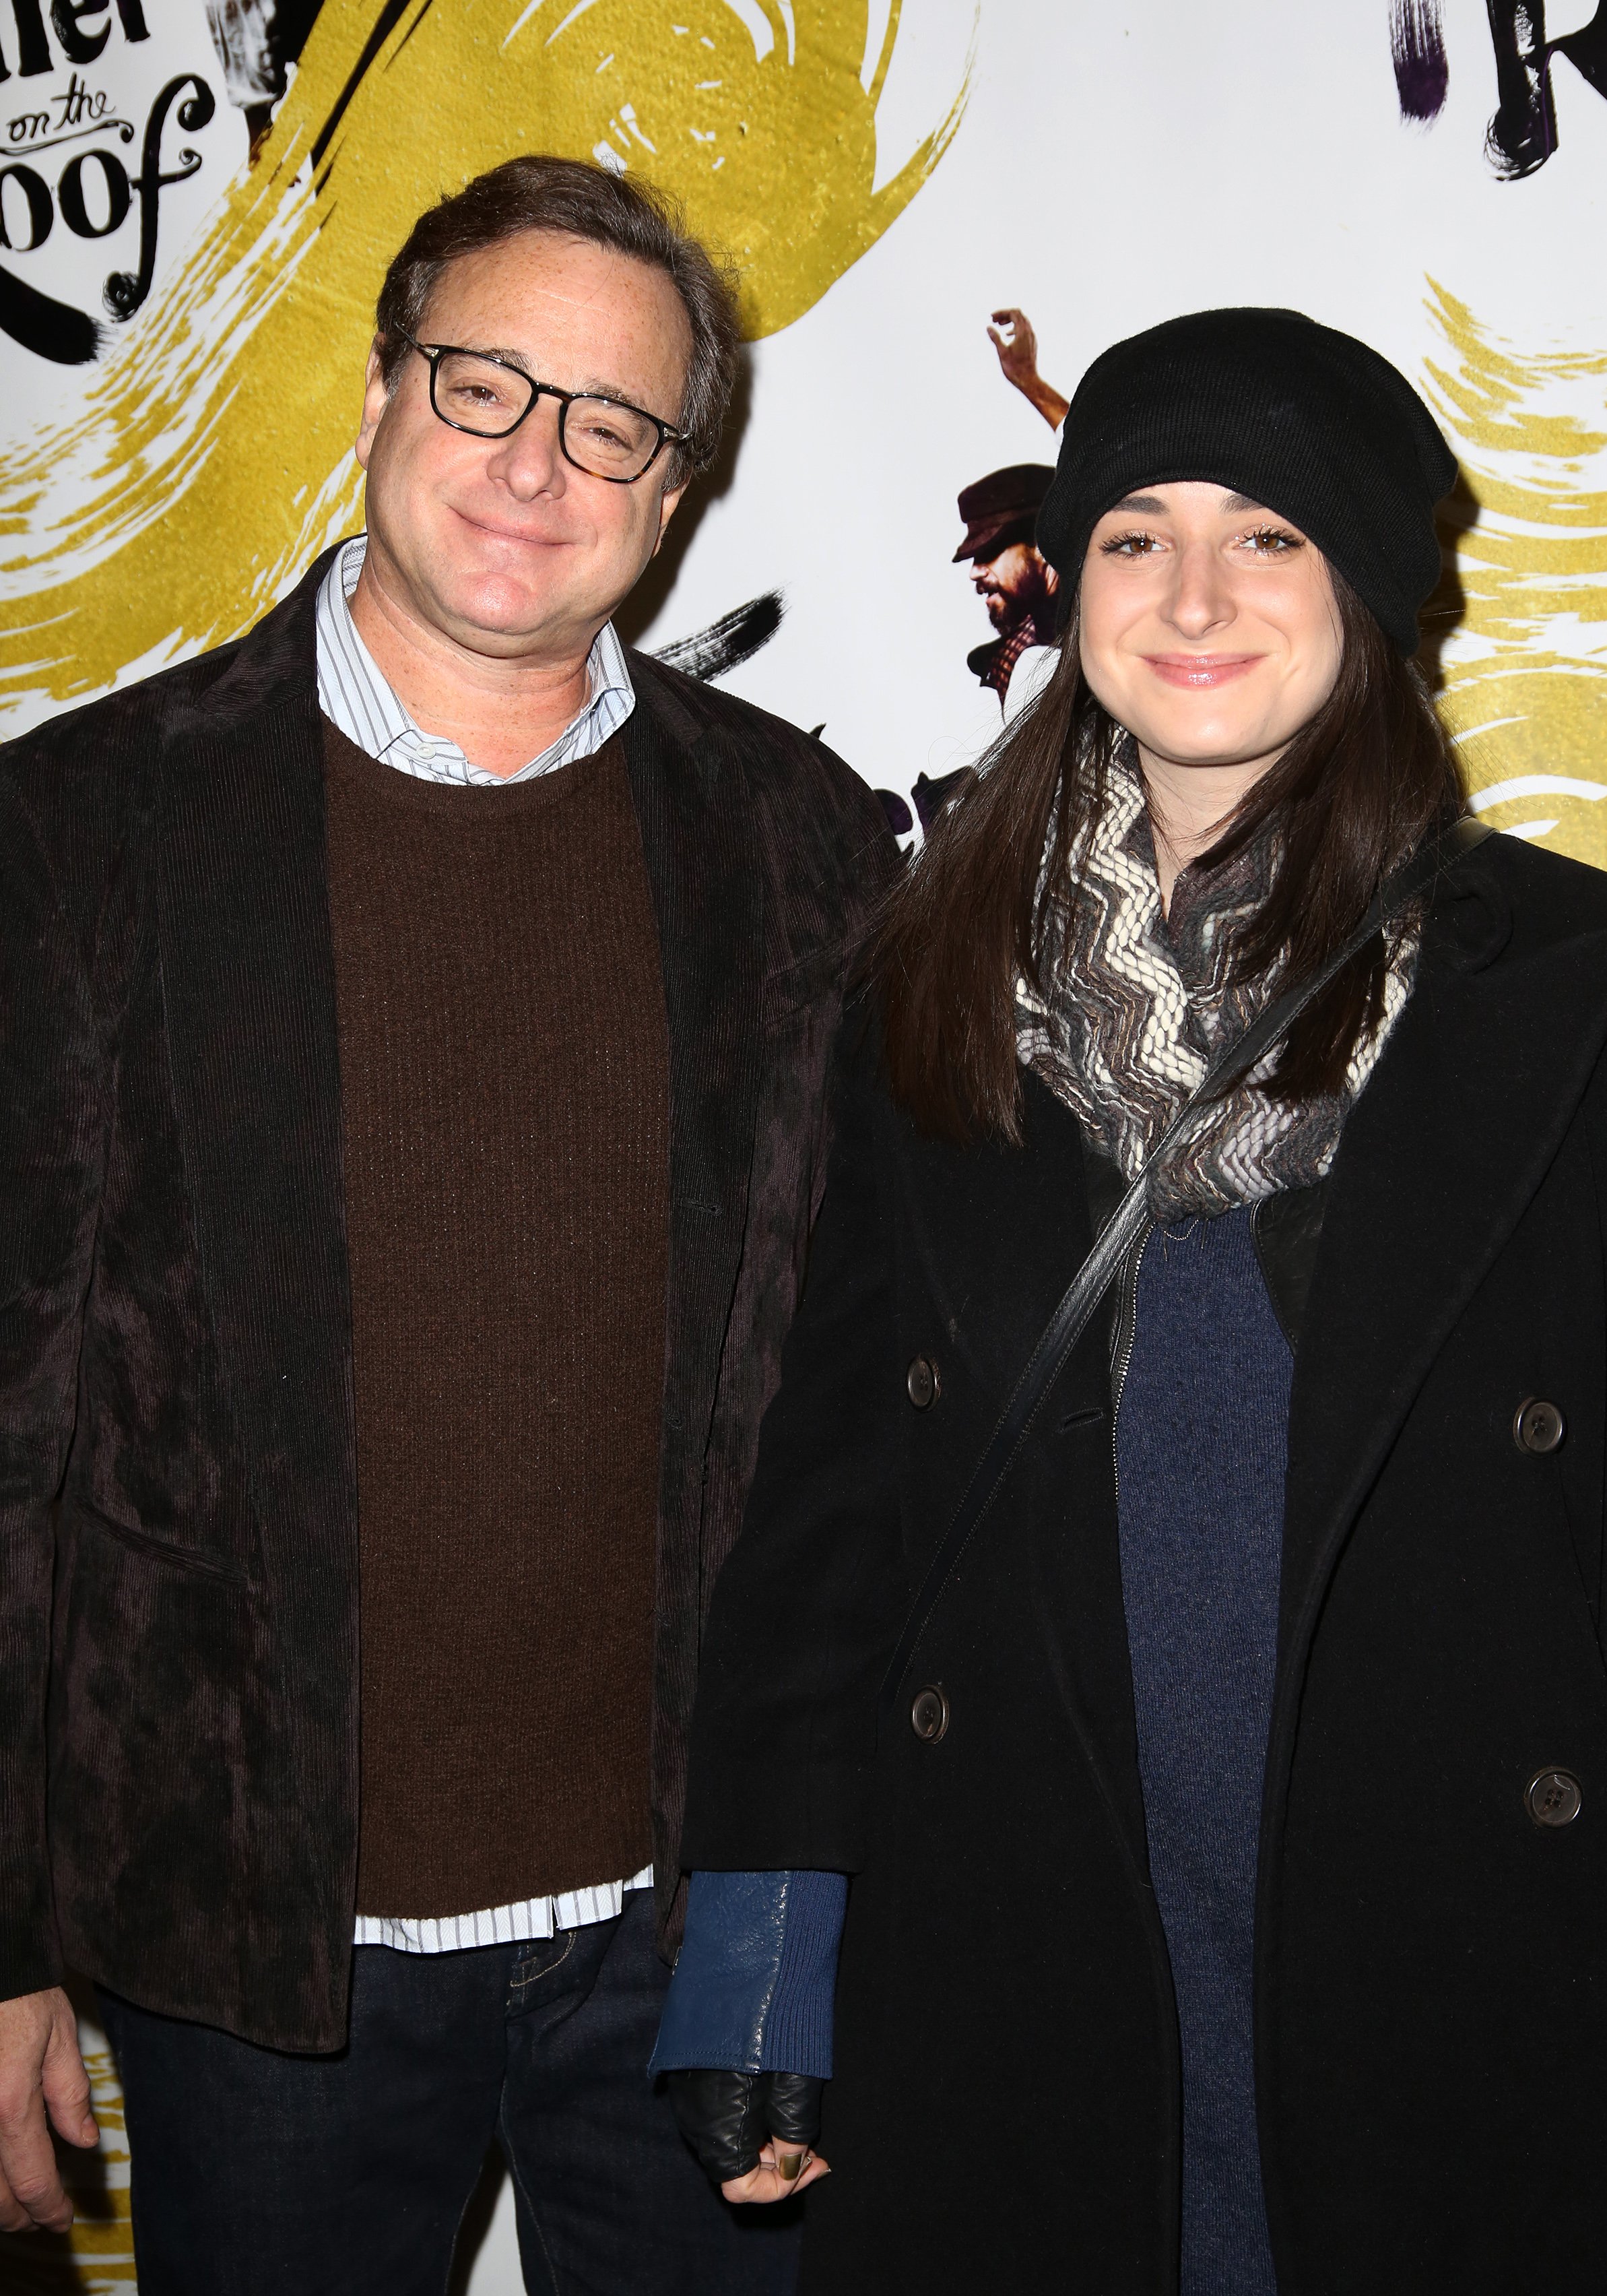 Bob Saget and Lara Saget at the Broadway opening night performance of "Fiddler On The Roof" on December 20, 2015 | Source: Getty Images